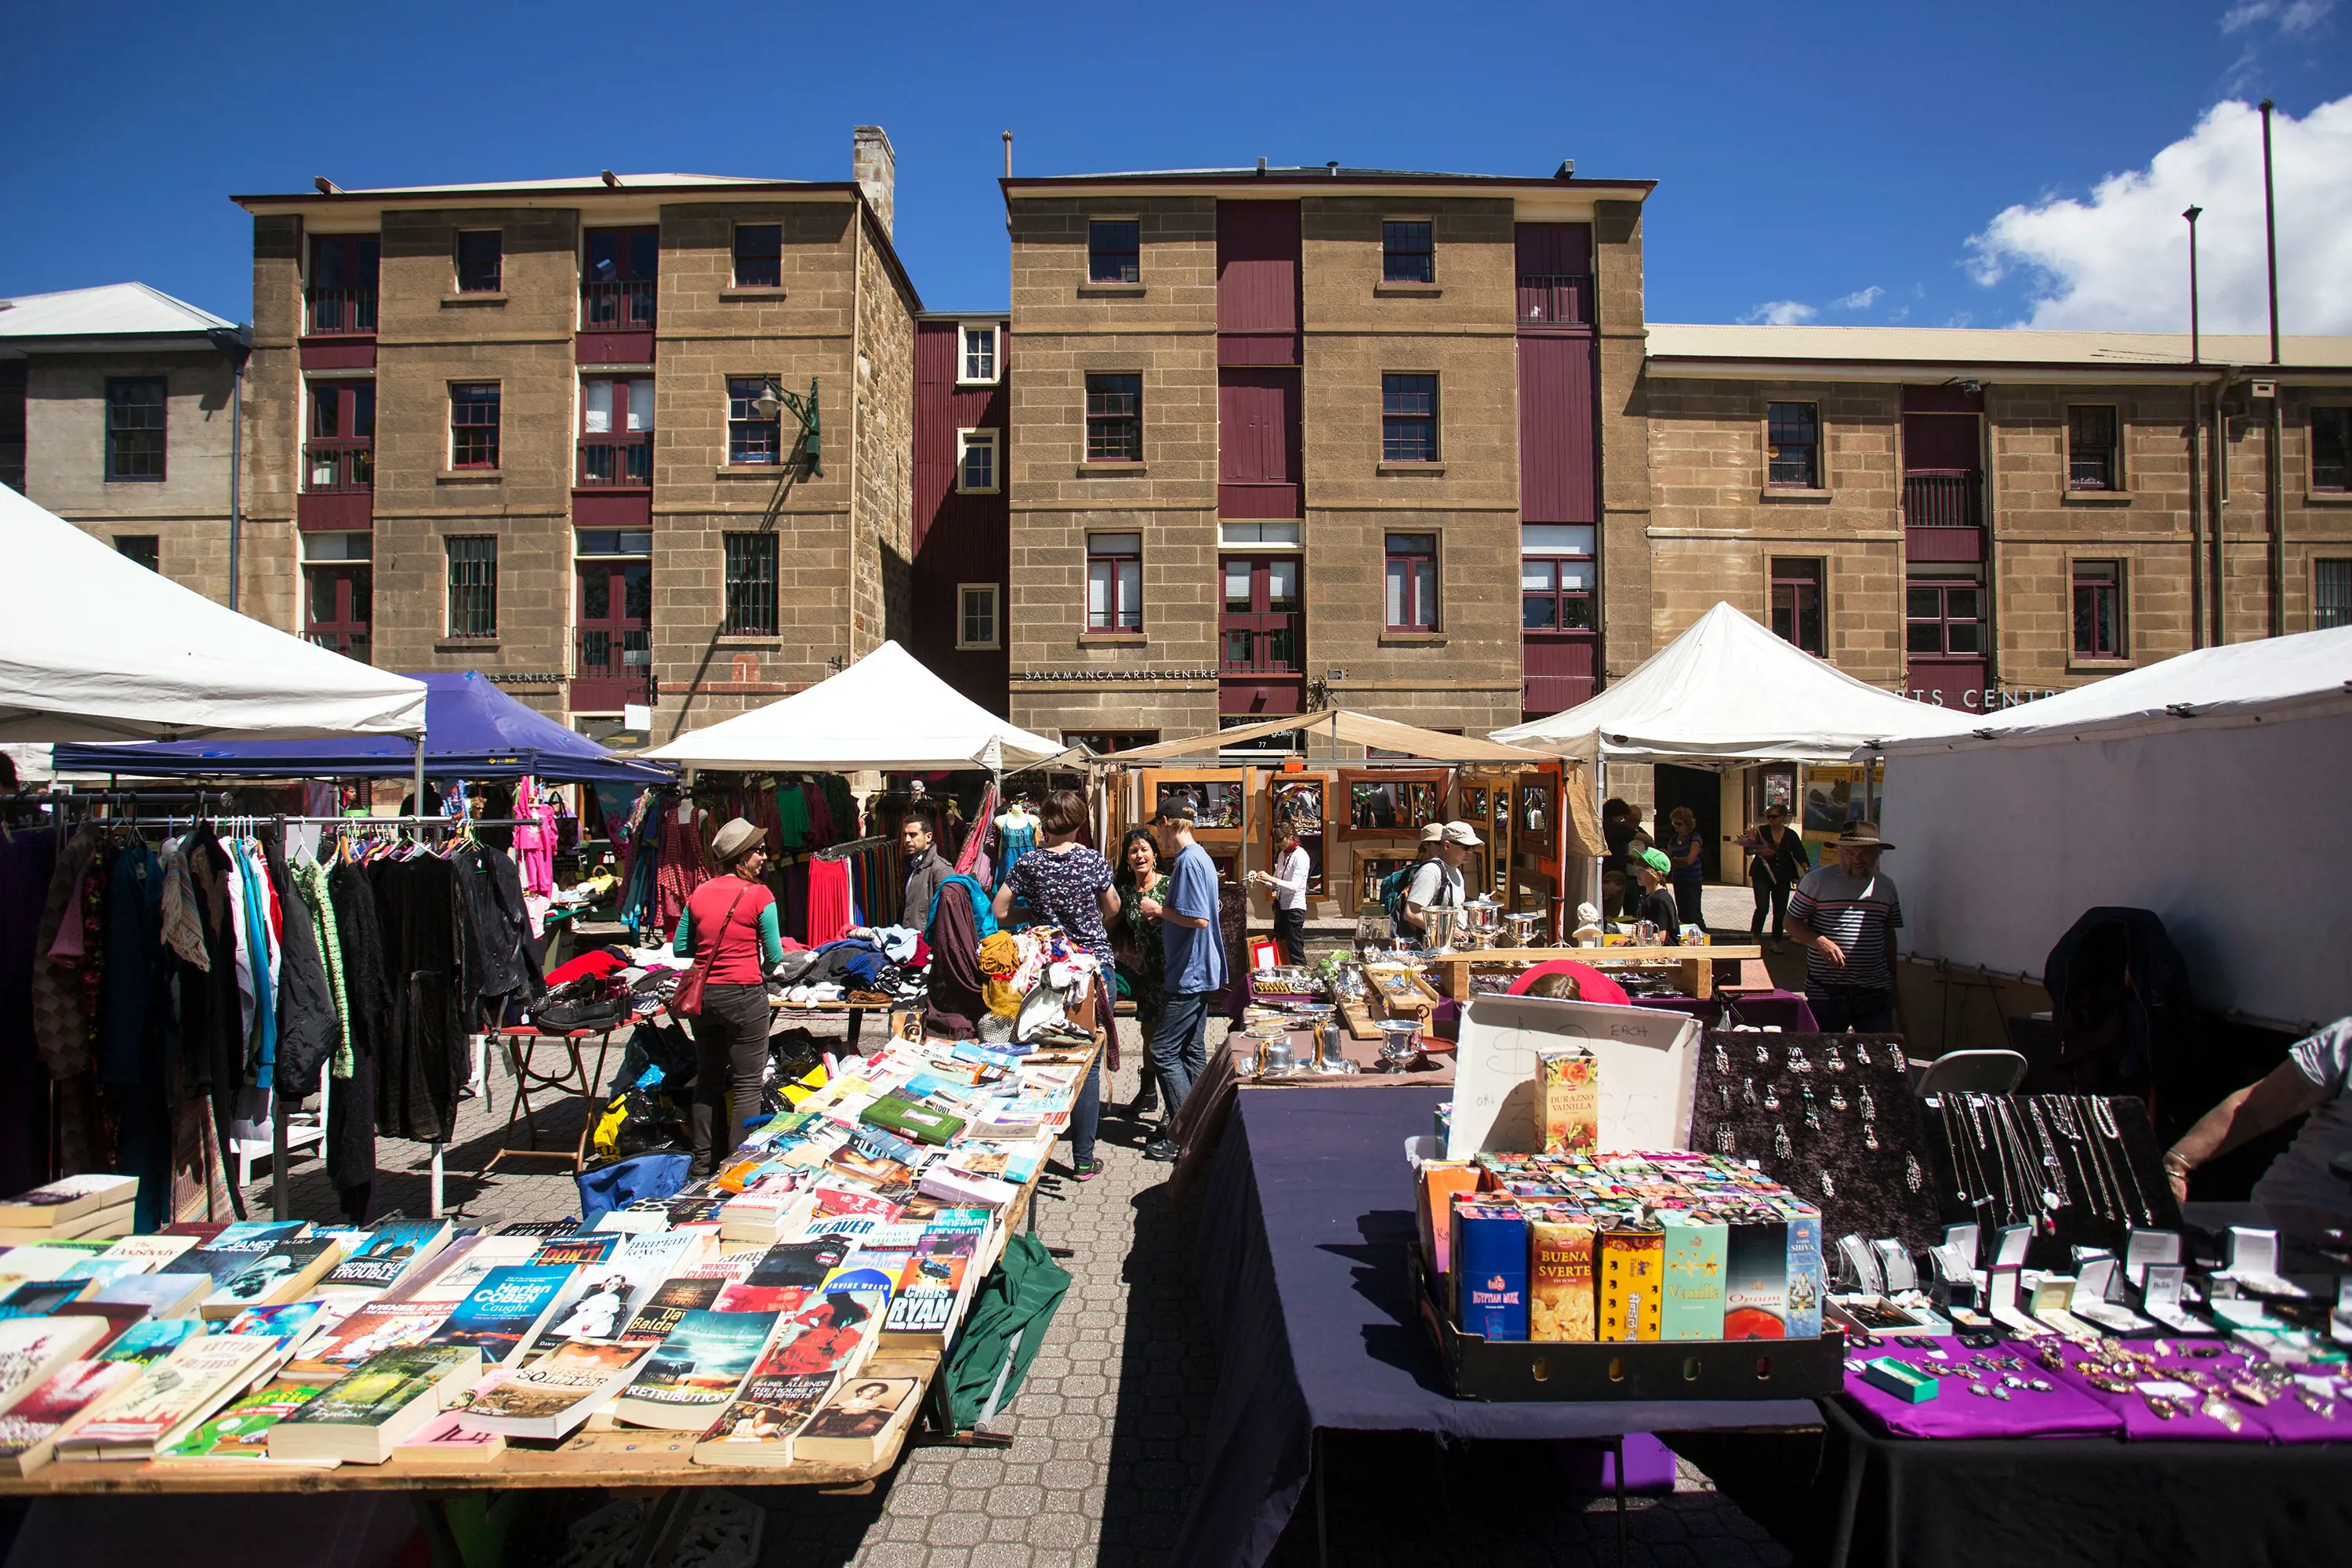 Market stalls with large tables display books, jewelry and oddments.